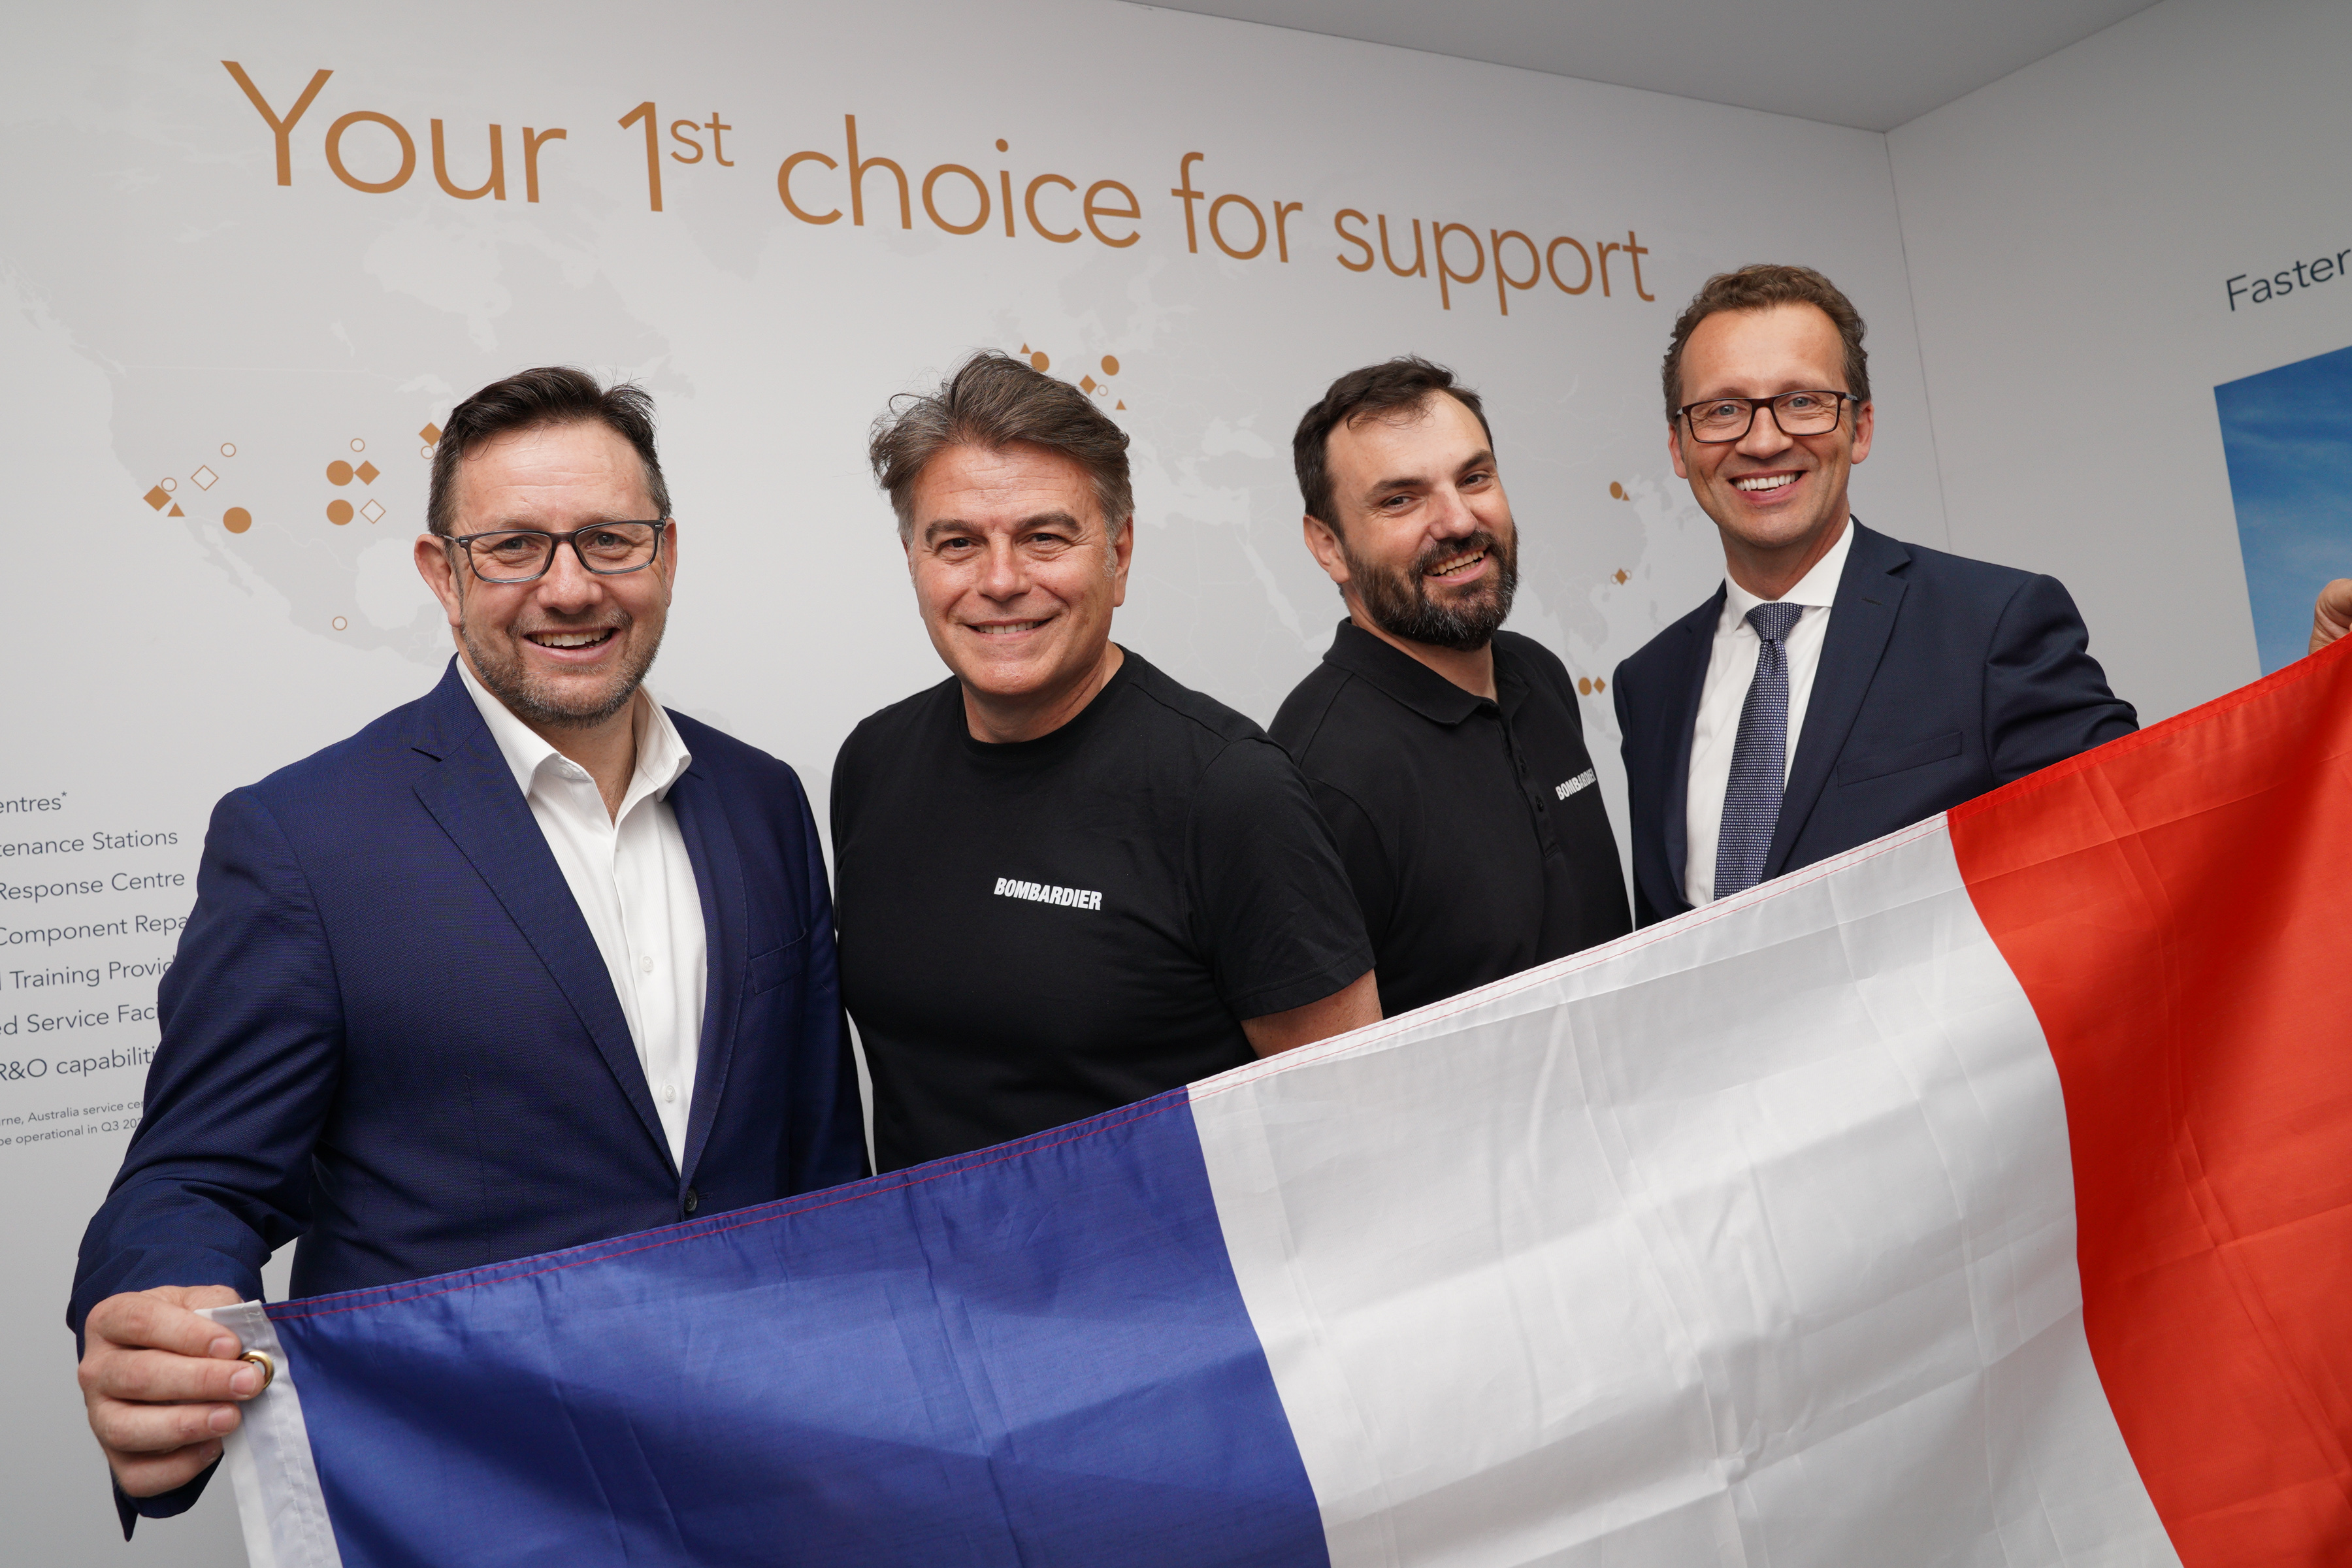 Bombardier celebrates the expansion of the Paris Line Maintenance Station. From left: Anthony Cox, Vice President, Customer Support, Bombardier; Mobile Response Team Engineers Pietro Iacubino and Sylvain Moratille; and Guillaume Landrivon, Vice President, Smart Services and Programs.